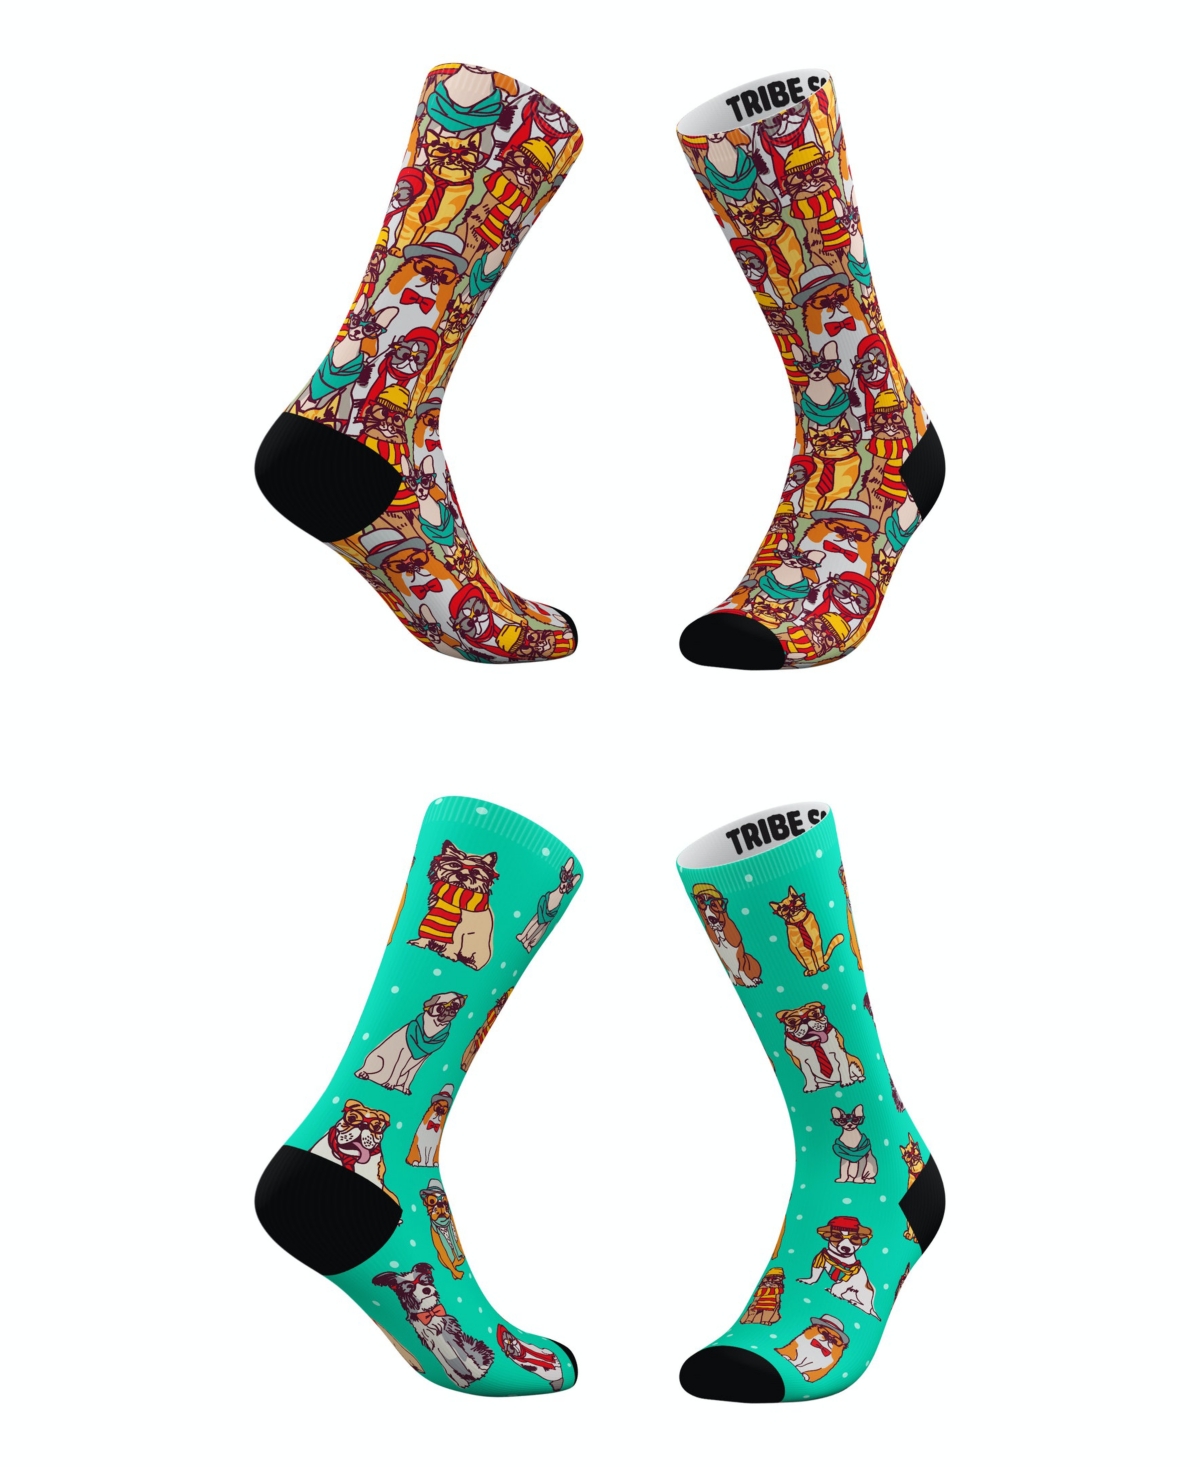 Men's and Women's Hipster Cat Socks, Set of 2 - Assorted Pre-Pack